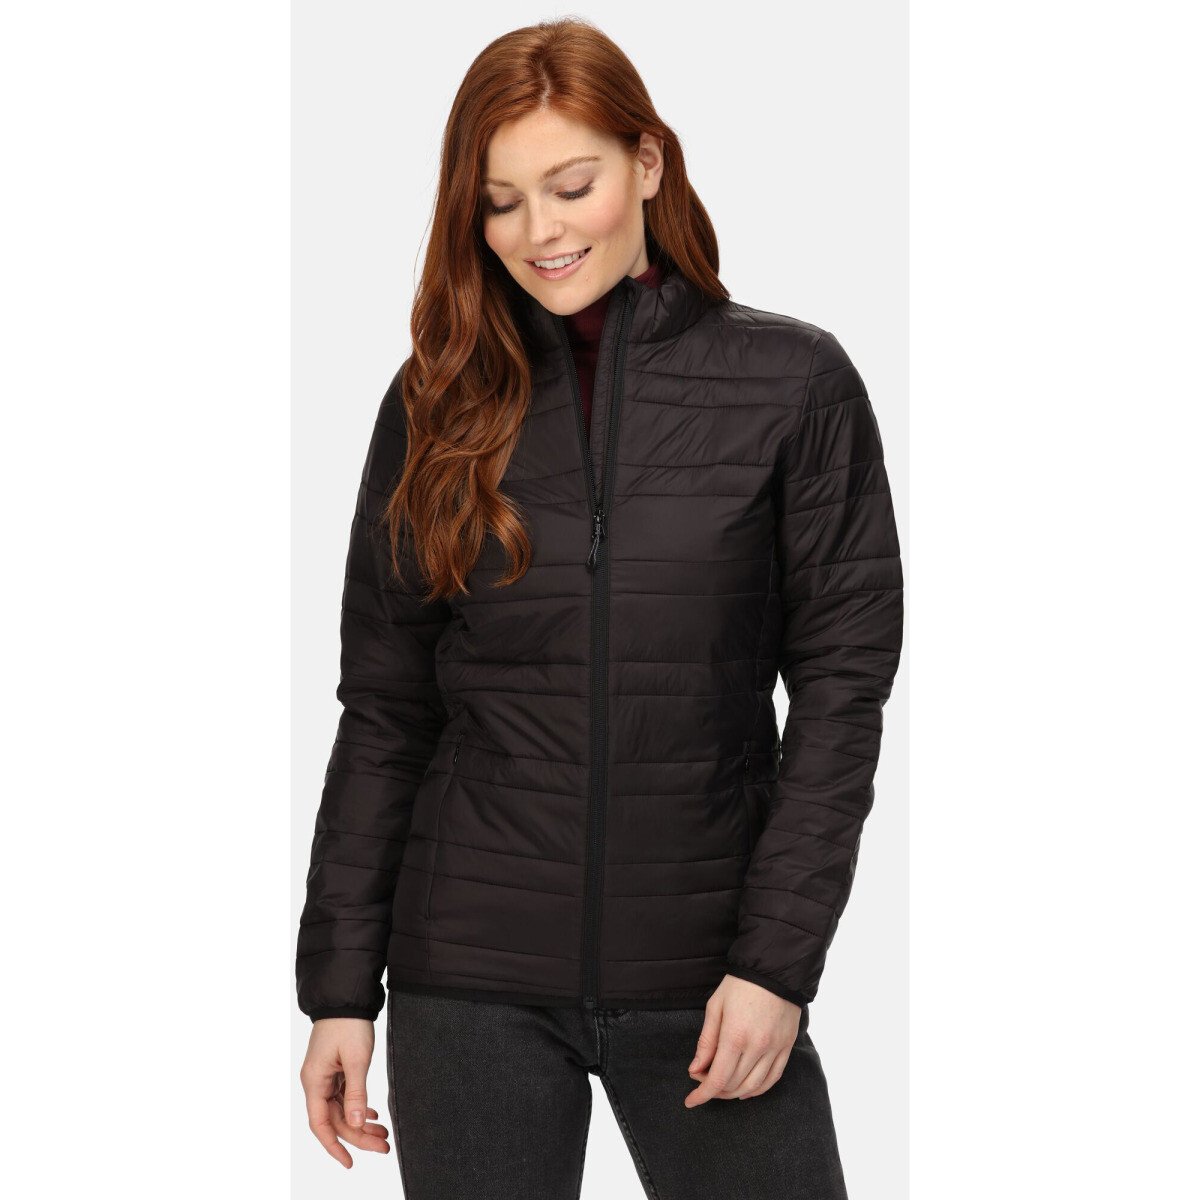 Regatta TRA497 Ladies Firedown Down-Touch Insulated Jacket from Lawson HIS